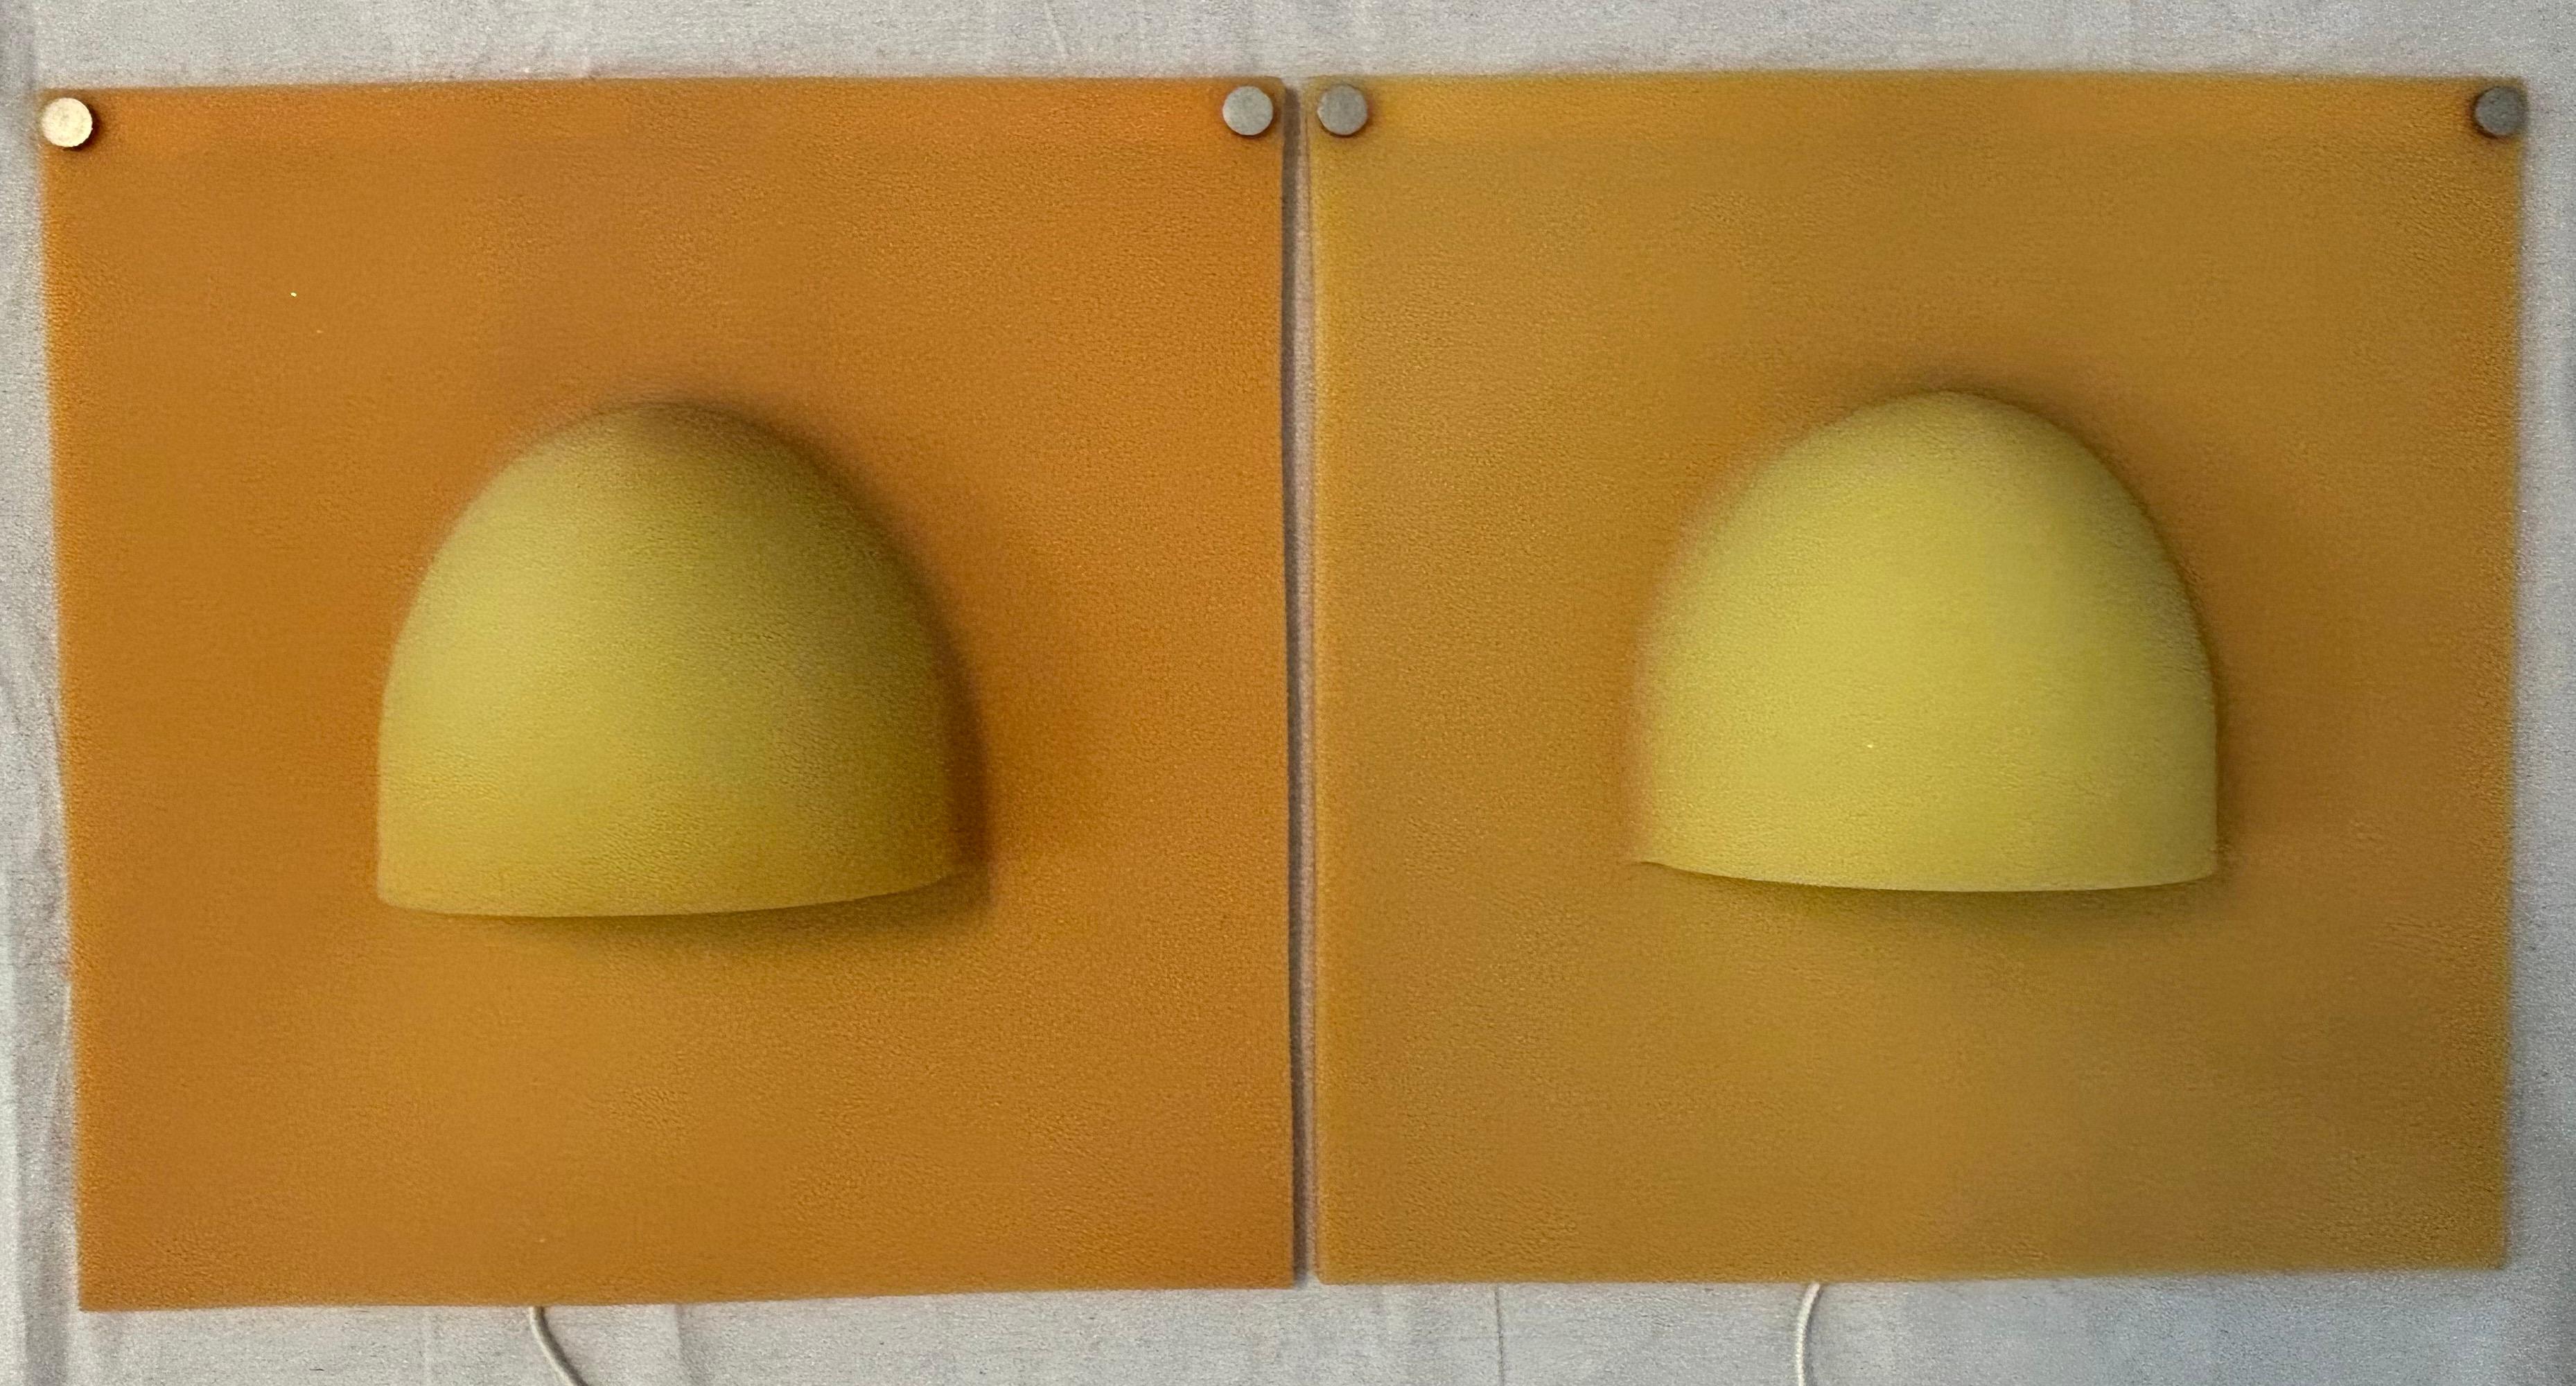 Pair of Delight Wall Lamps or Sconces by Adrien Gardere for Ligne Roset, France In Good Condition For Sale In Ft Lauderdale, FL